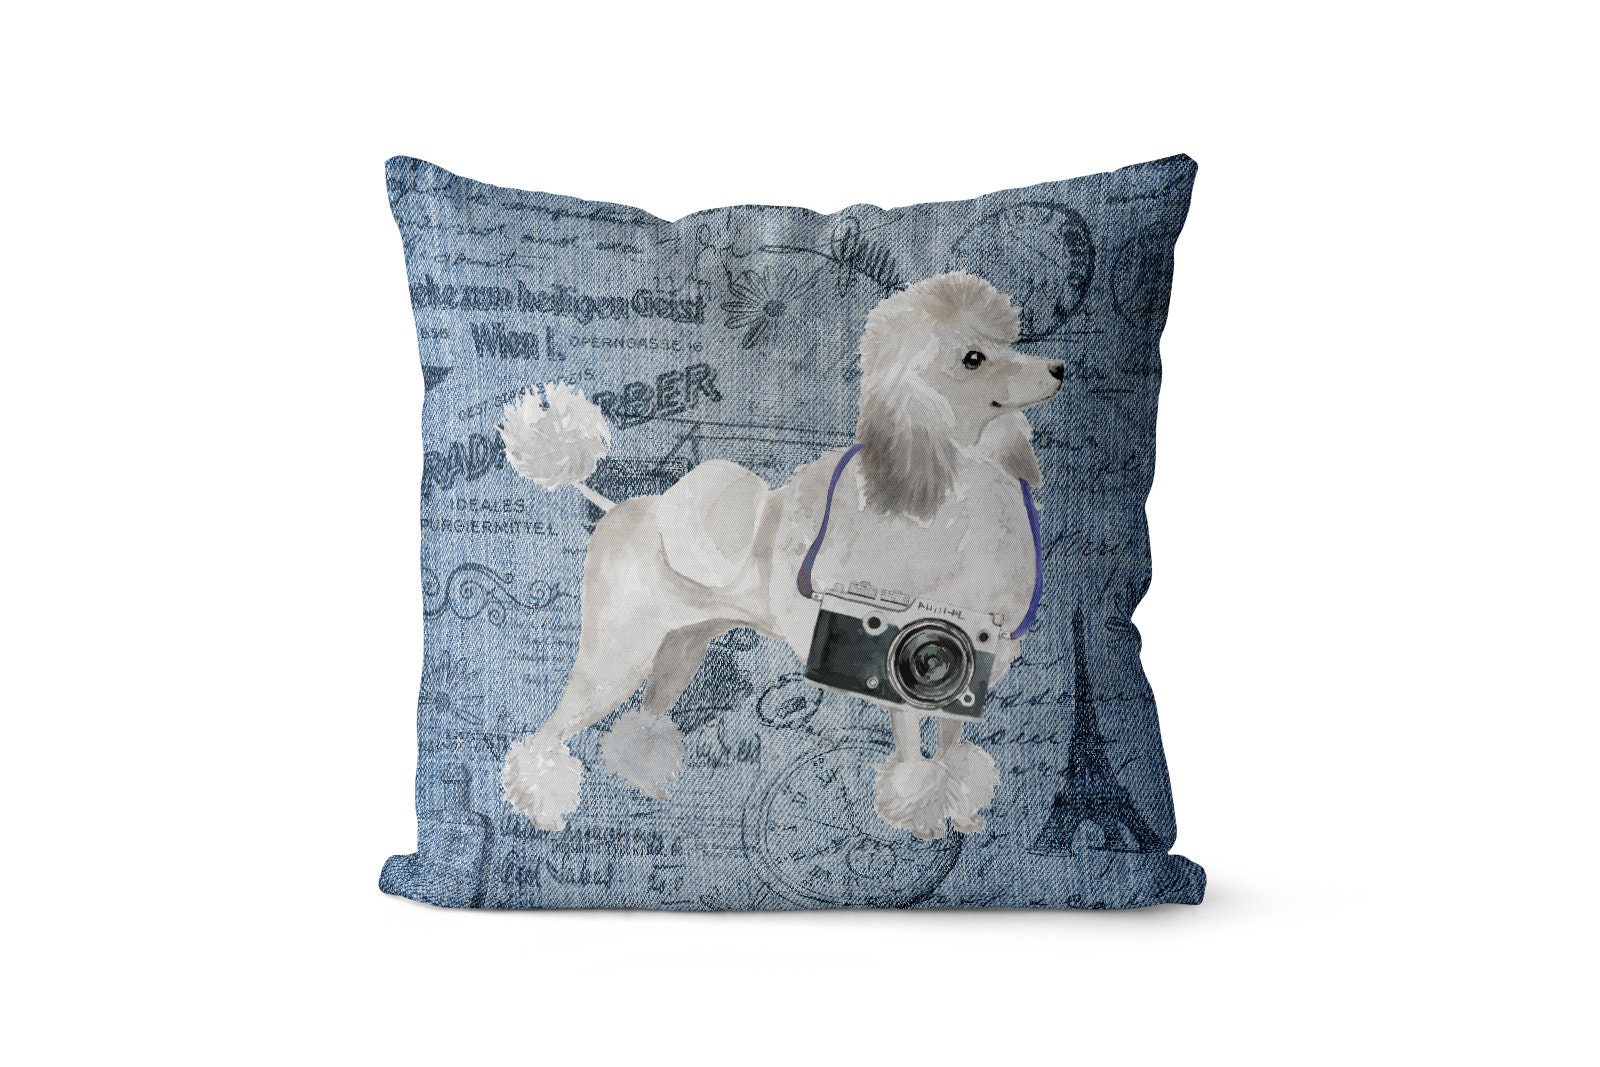 White Poodle Dog Inspired Throw Pillow - Large Denim Style Cushion With Filling Available in Linen Or Velour. Travel Collection